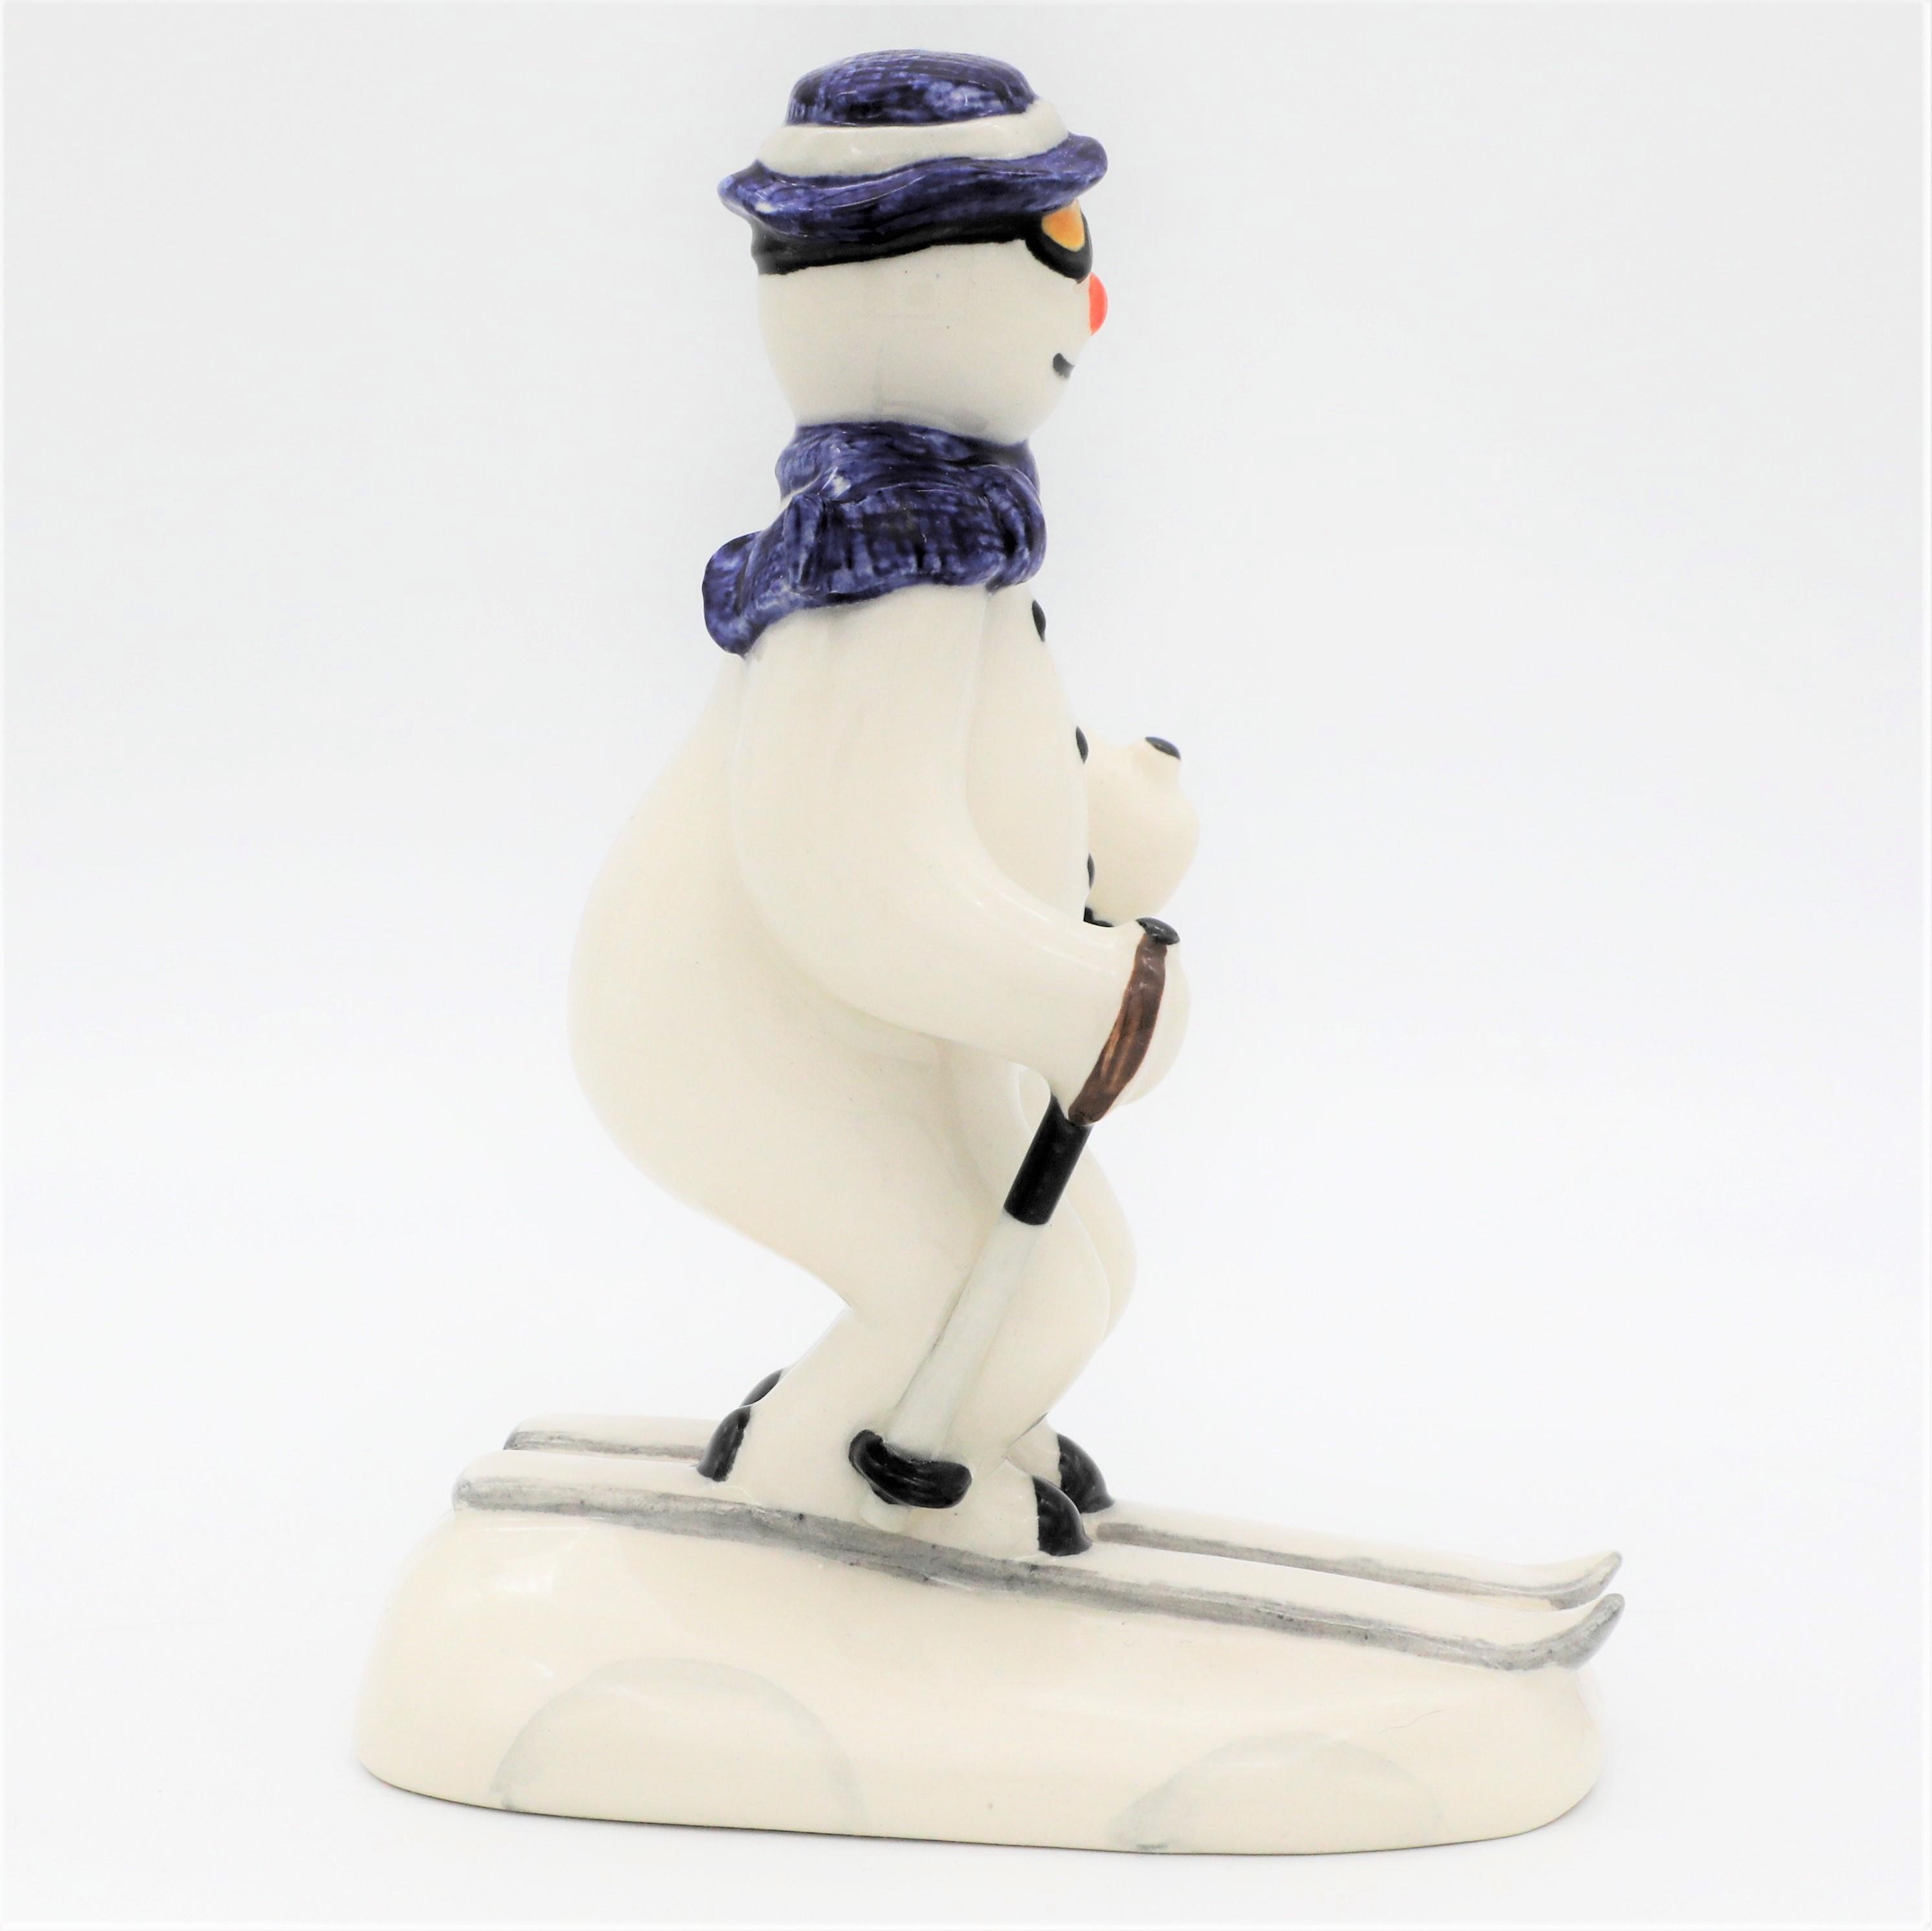 Royal Doulton The Skiing Snowman (DS21) Prototype side